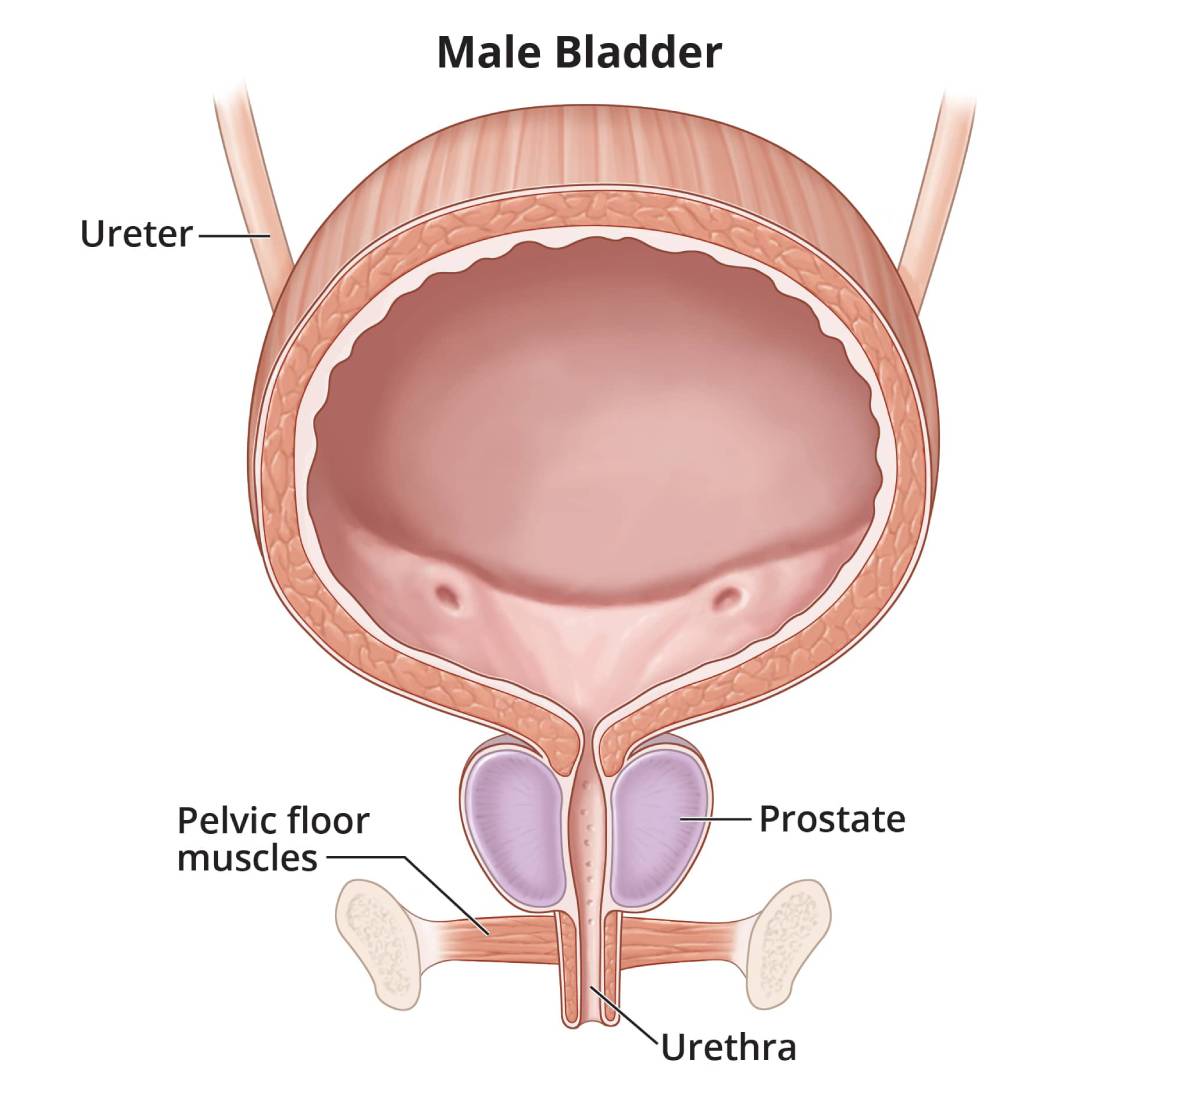 5 Bladder Diseases You Should Know About